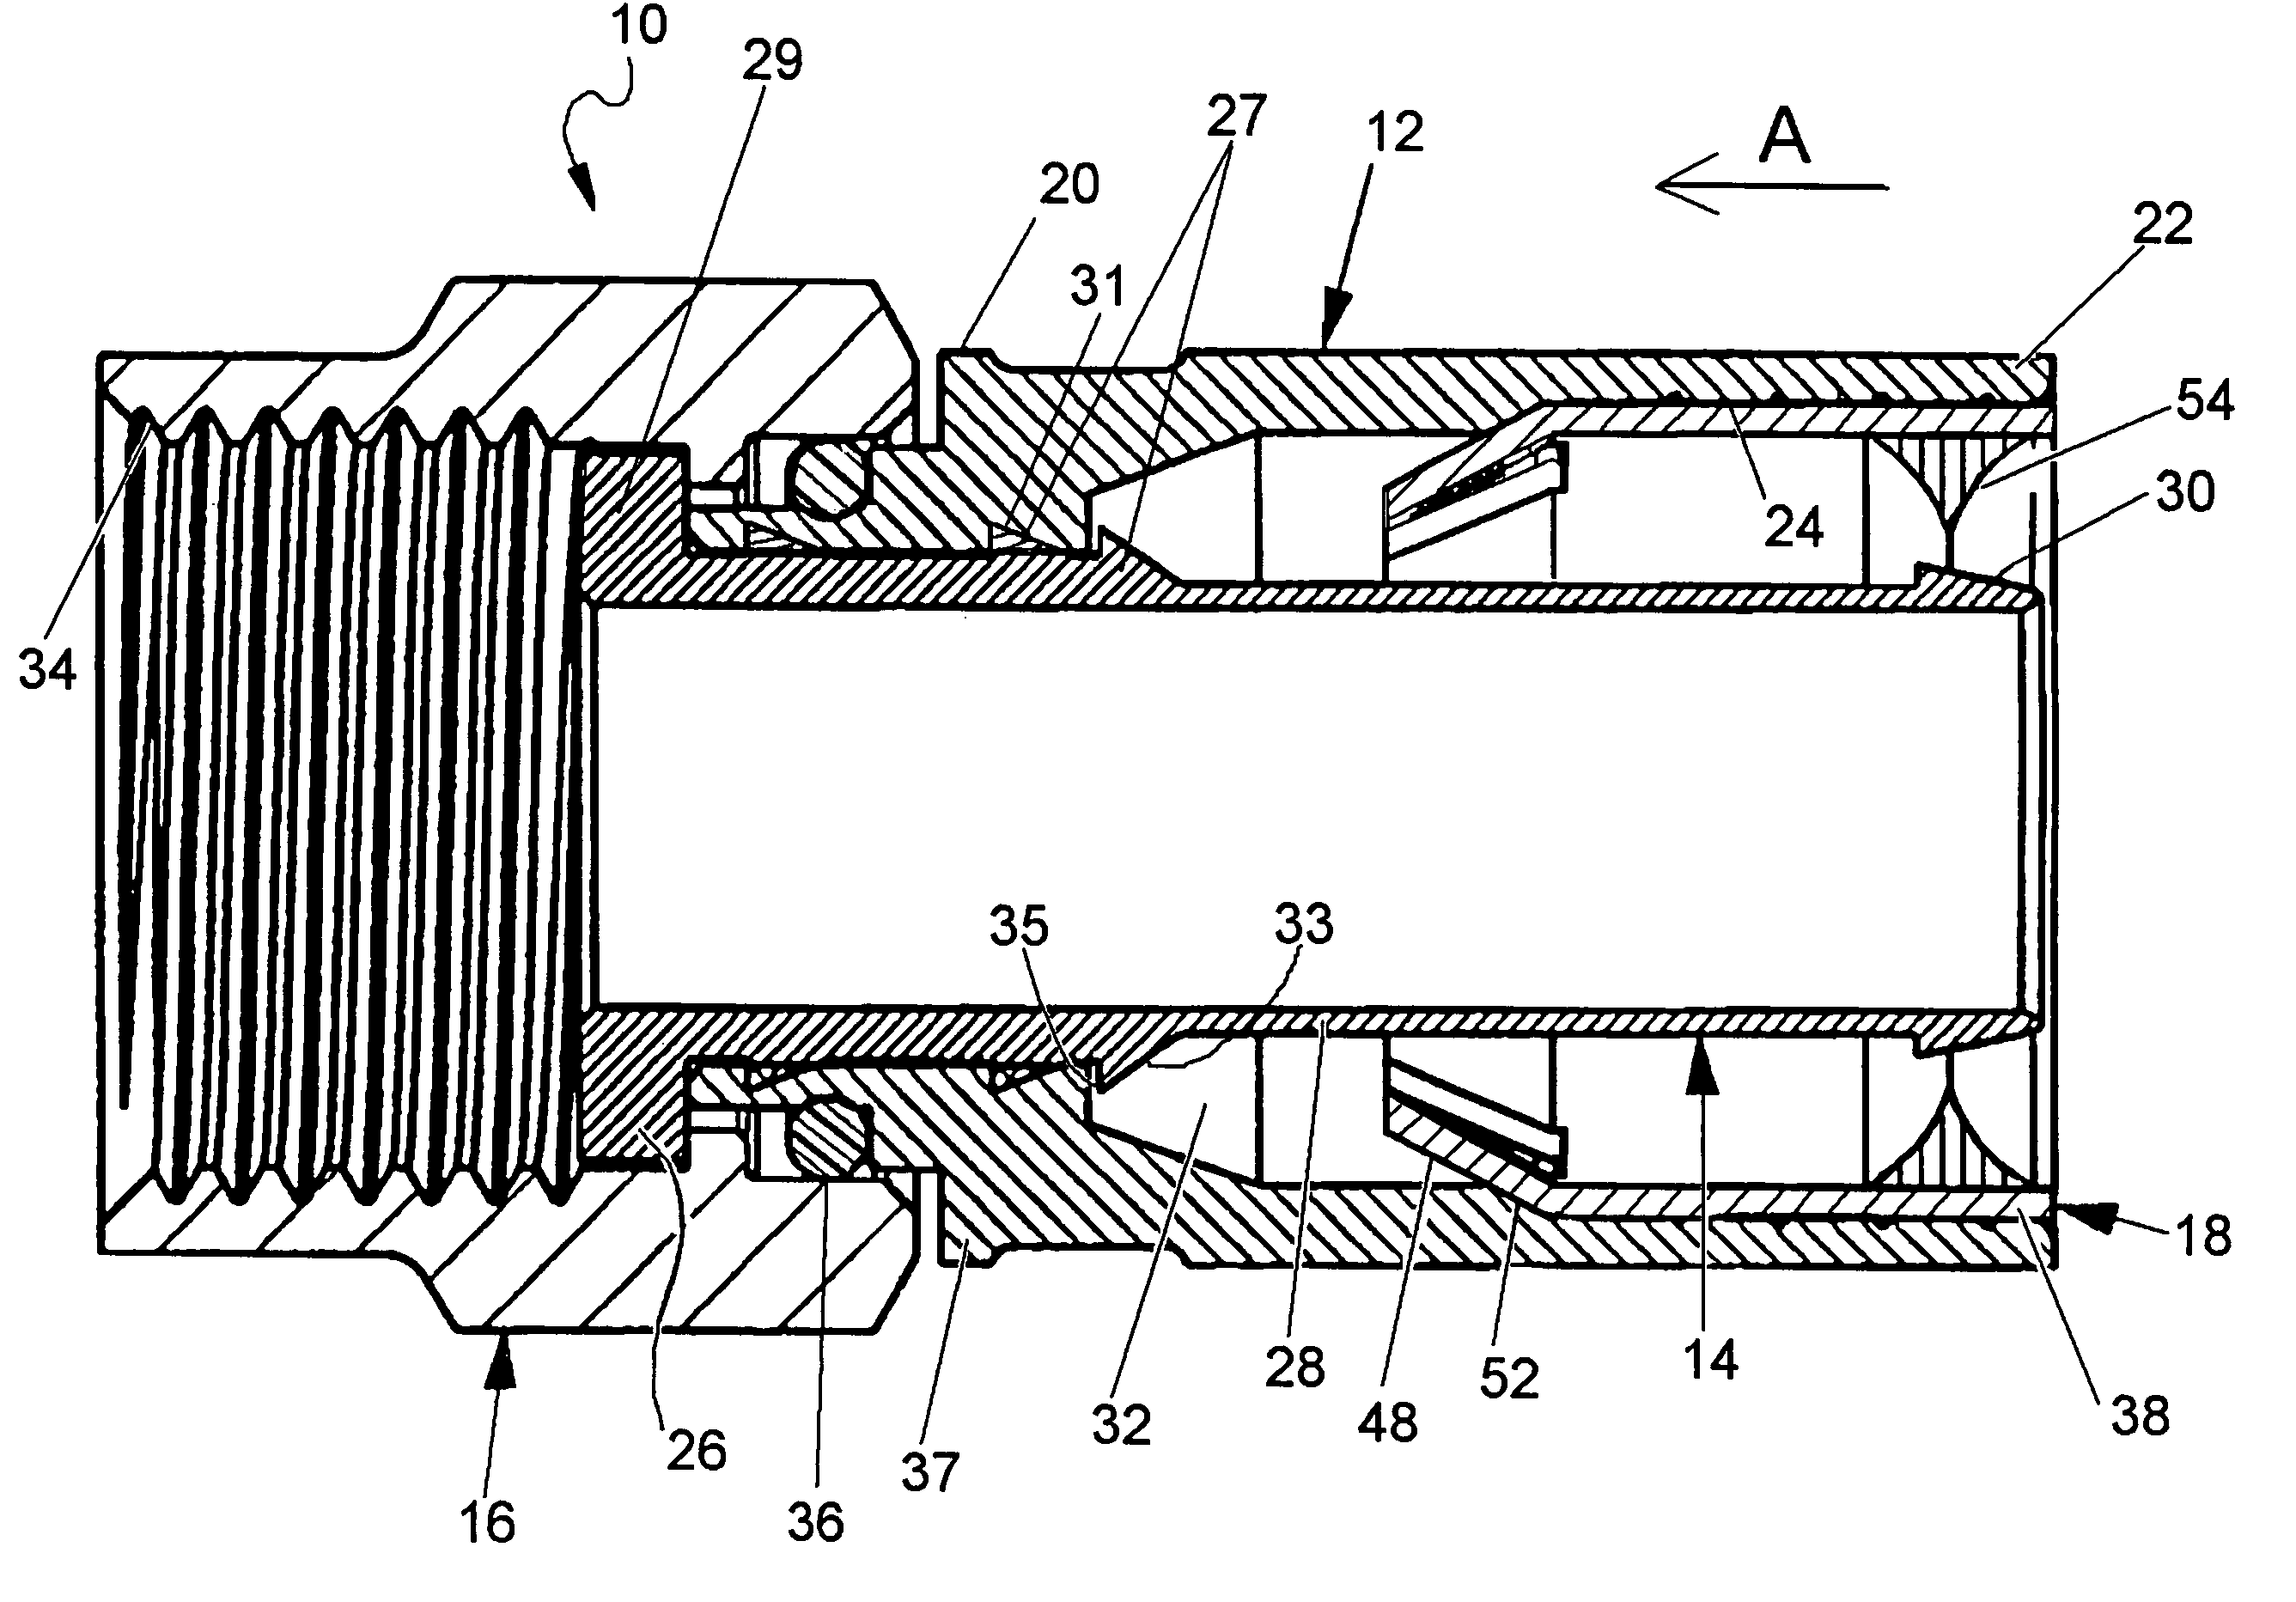 Coaxial cable connector with self-gripping and self-sealing features